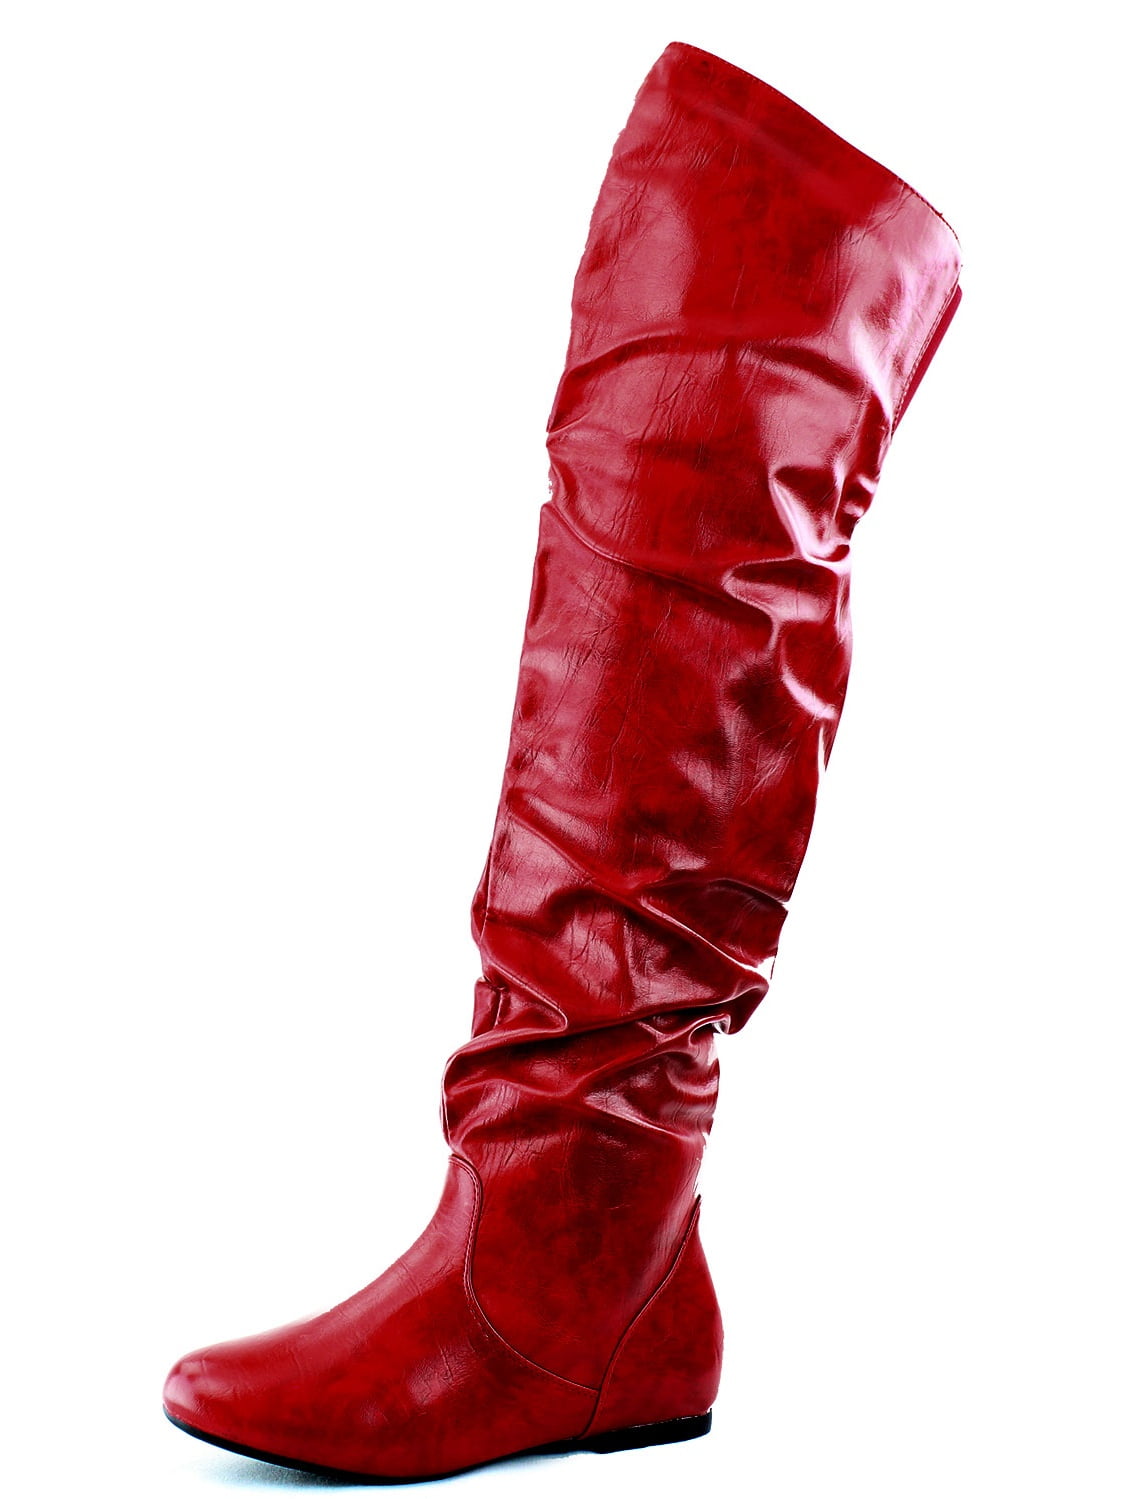 Dailyshoes Dailyshoes Womens Fashion Hi Over The Knee Thigh High Flat Slouch Boots Red Pu 10